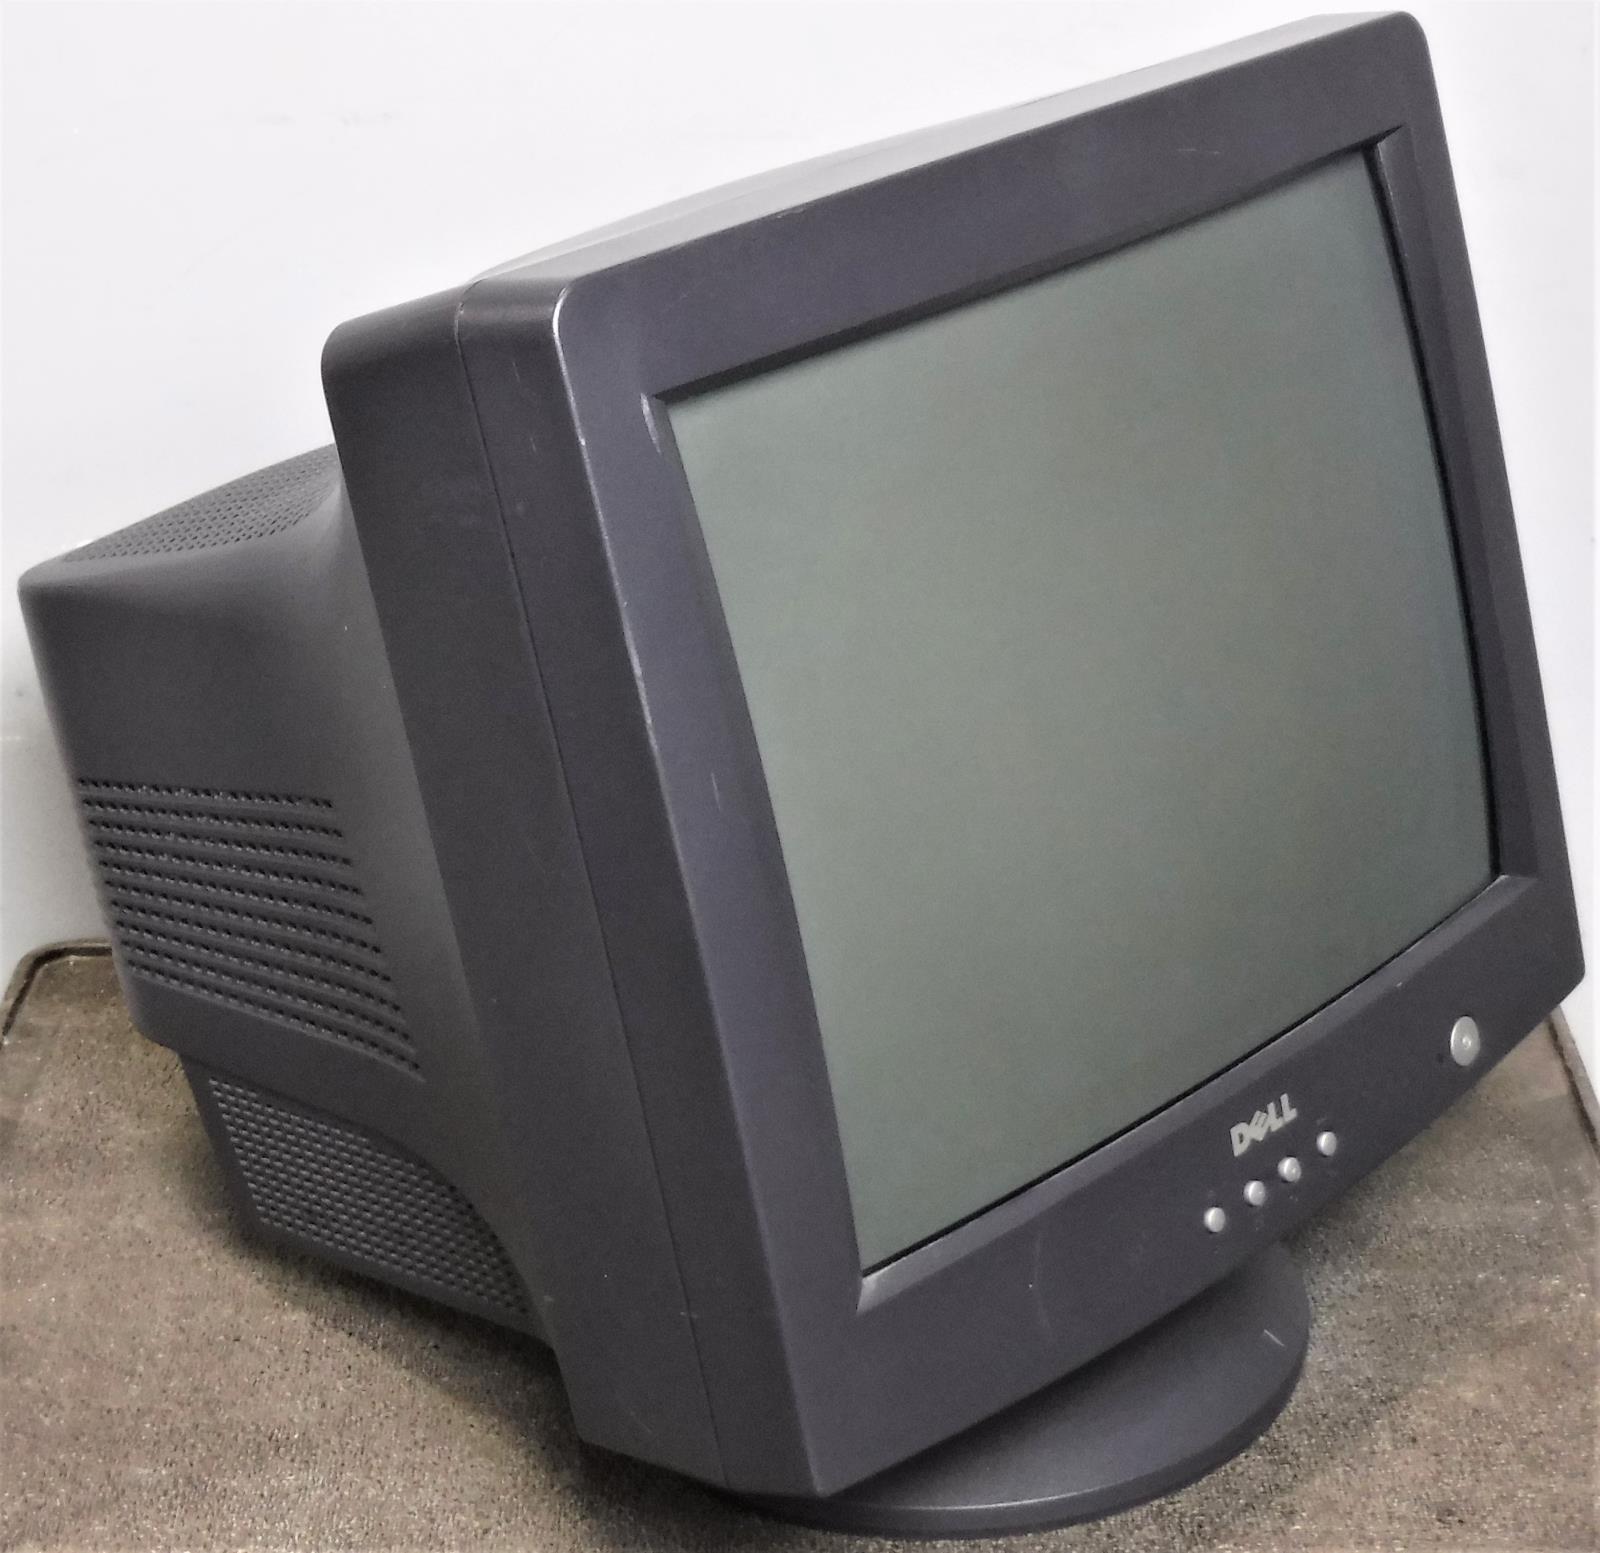 device-crt-crt_picture